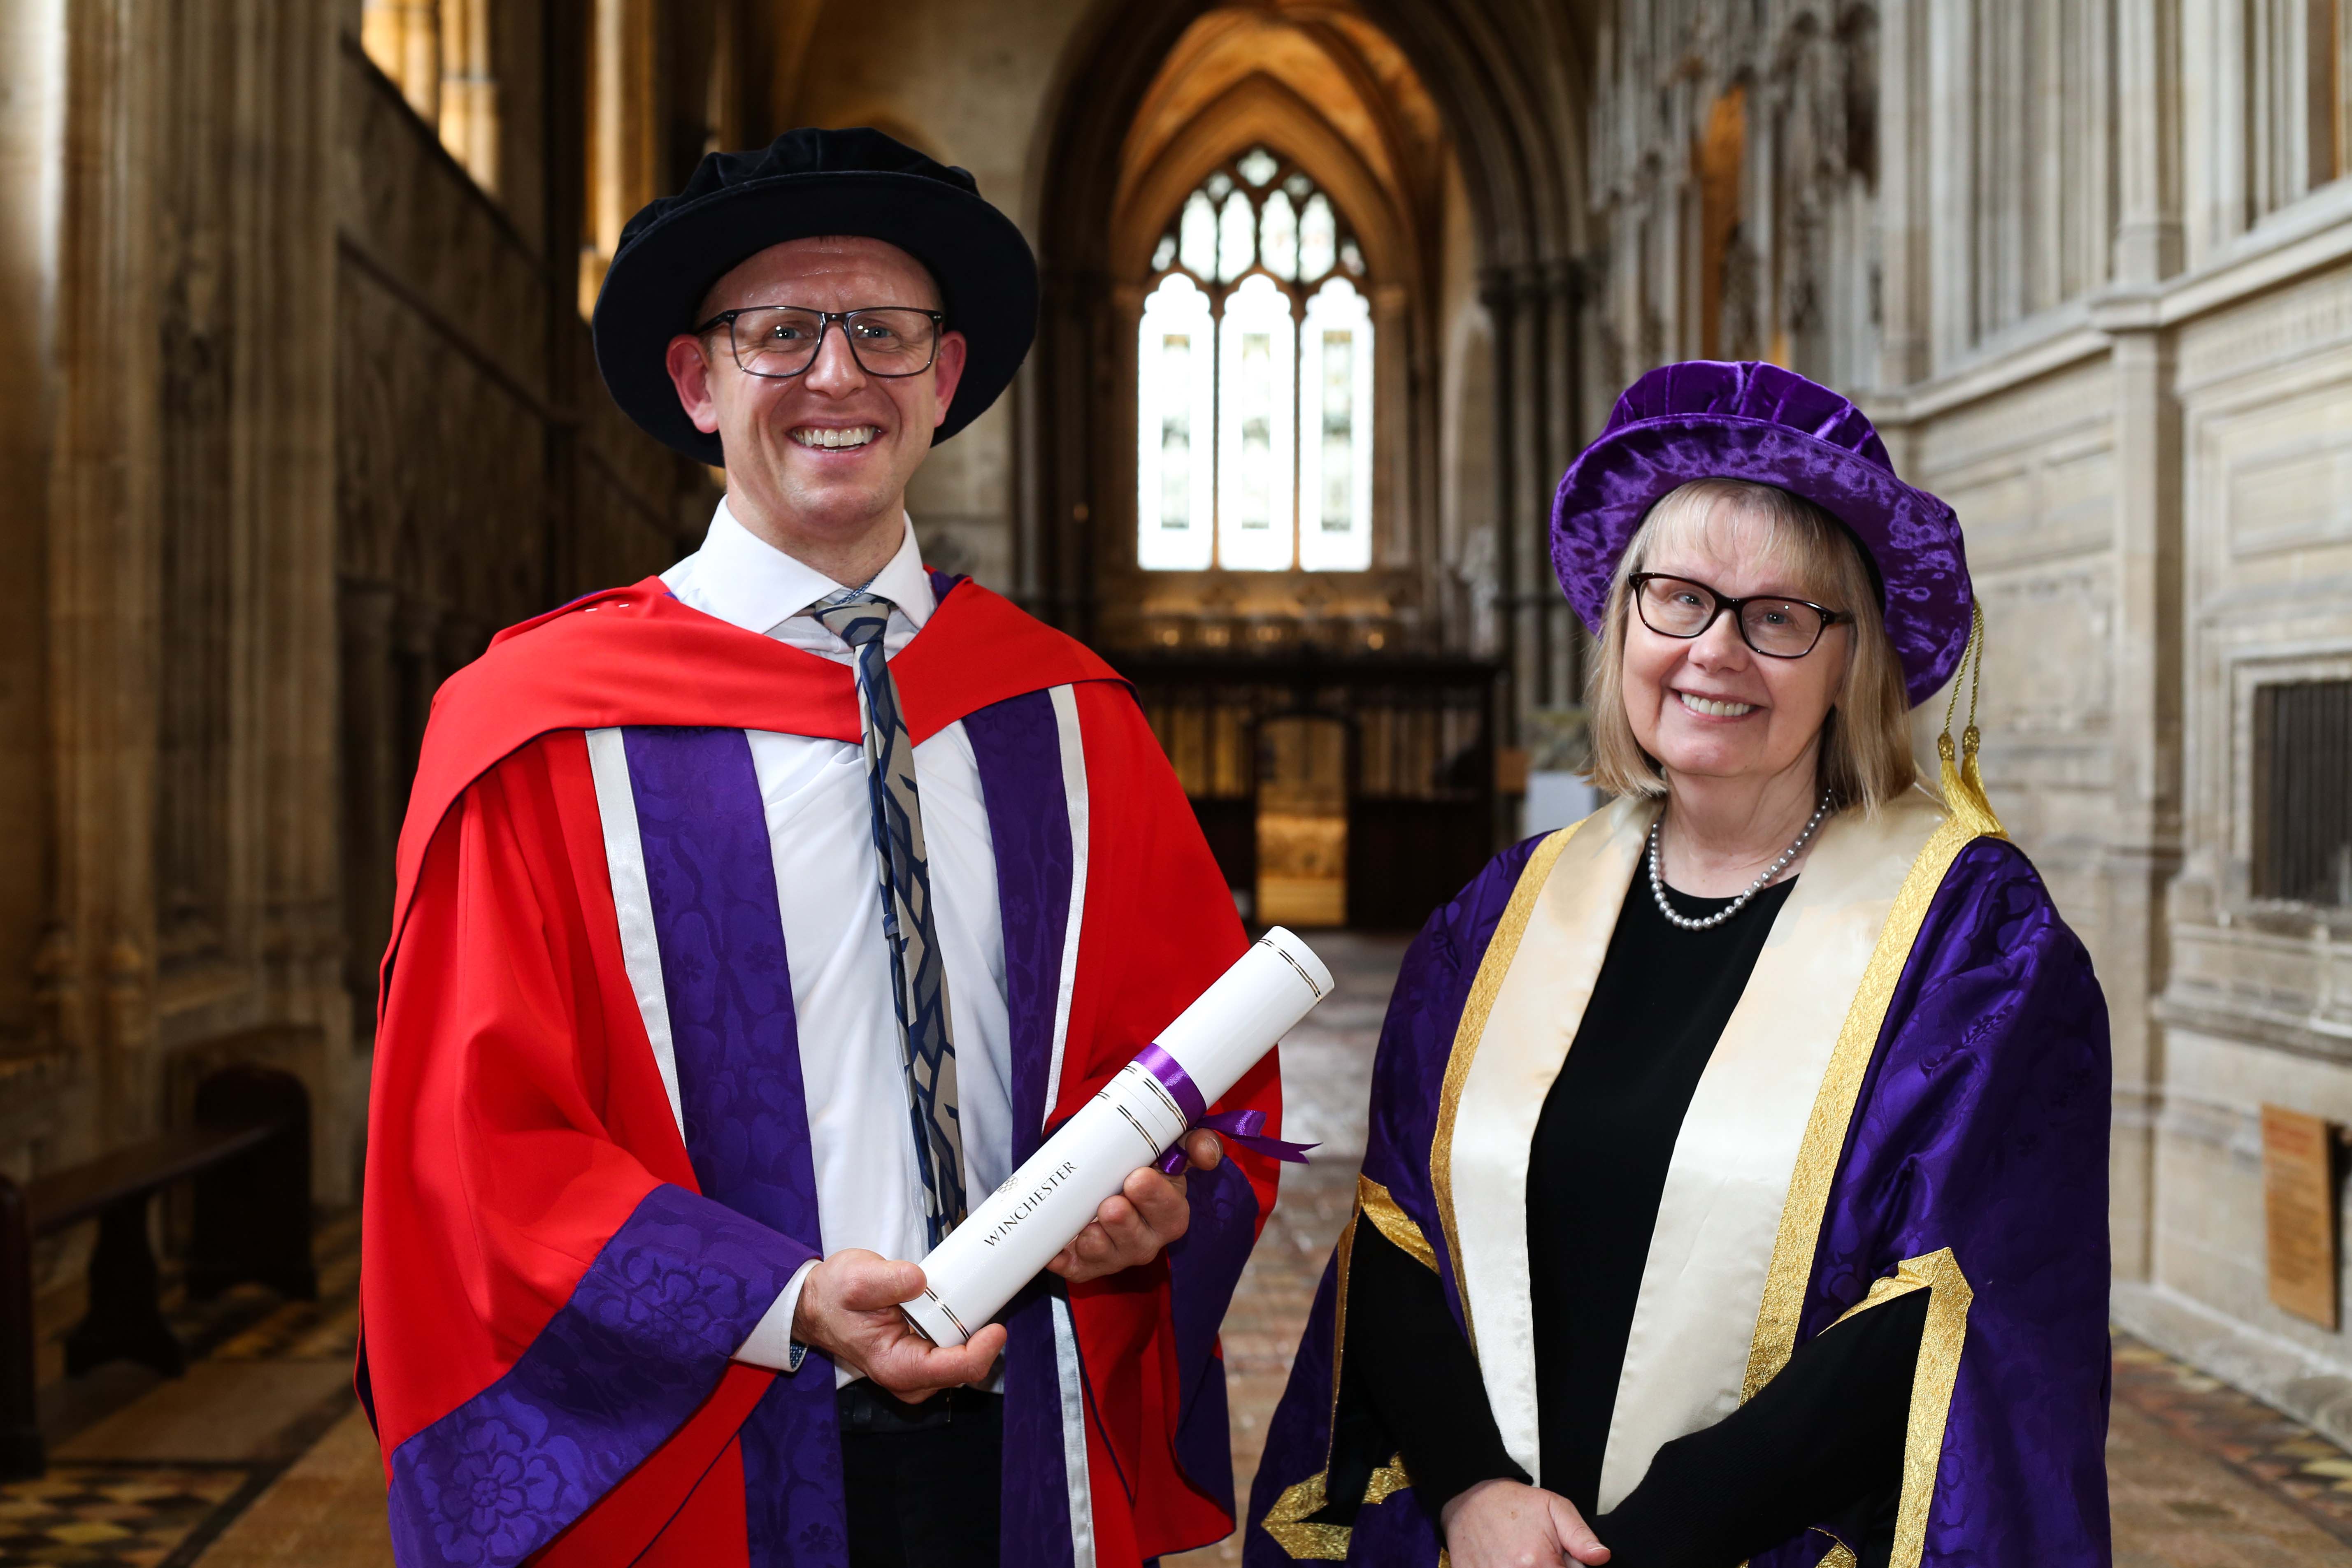 Aaaron Phipps with Sarah Greer the Vice-Chancellor